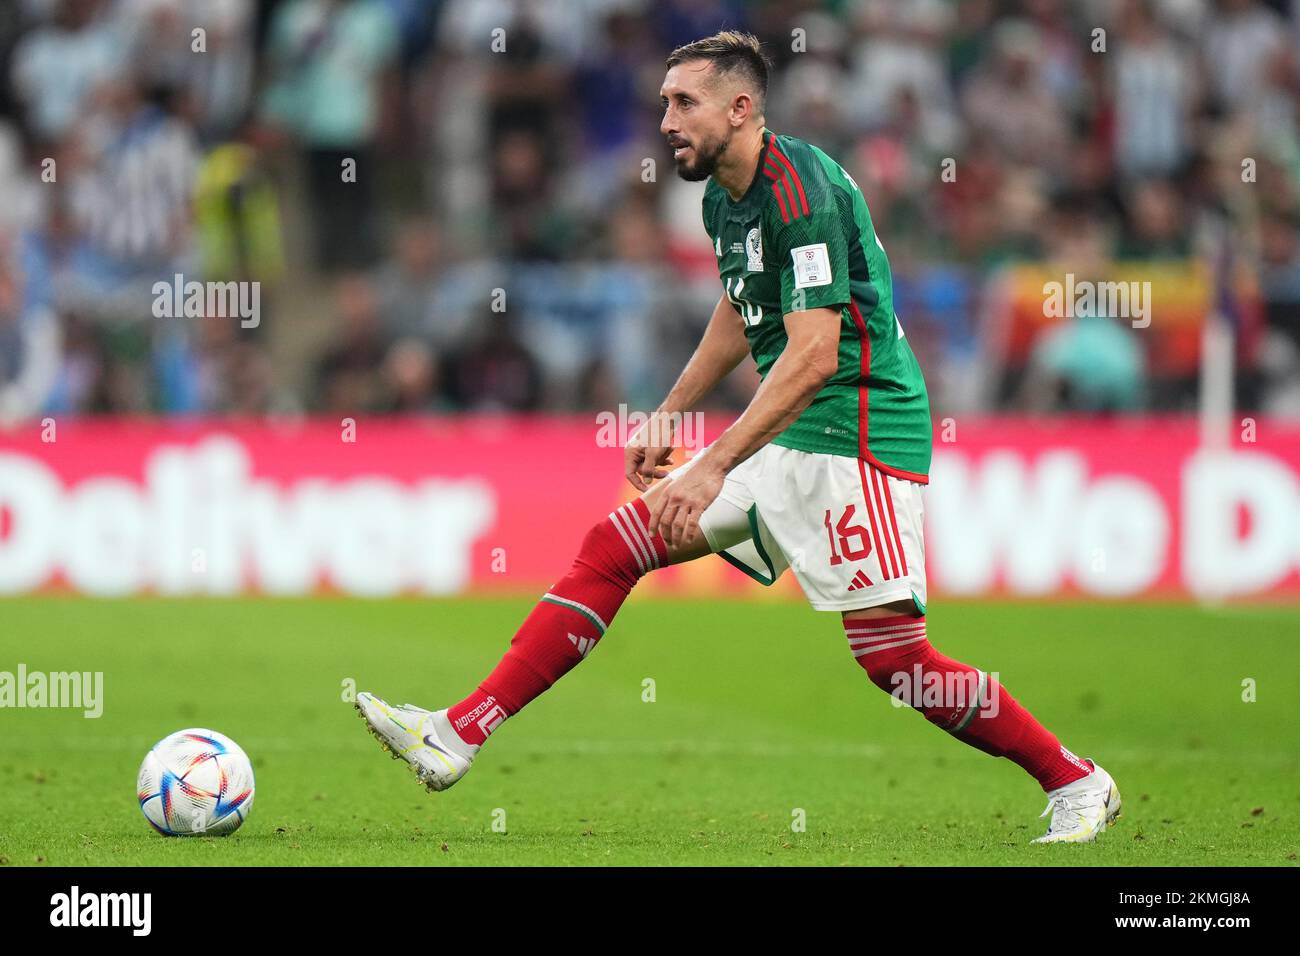 Hector Herrera of Mexico during the FIFA World Cup Qatar 2022 match, Group C, between Argentina and Mexico played at Lusail Stadium on Nov 26, 2022 in Lusail, Qatar. (Photo by Bagu Blanco / PRESSIN) Credit: PRESSINPHOTO SPORTS AGENCY/Alamy Live News Stock Photo